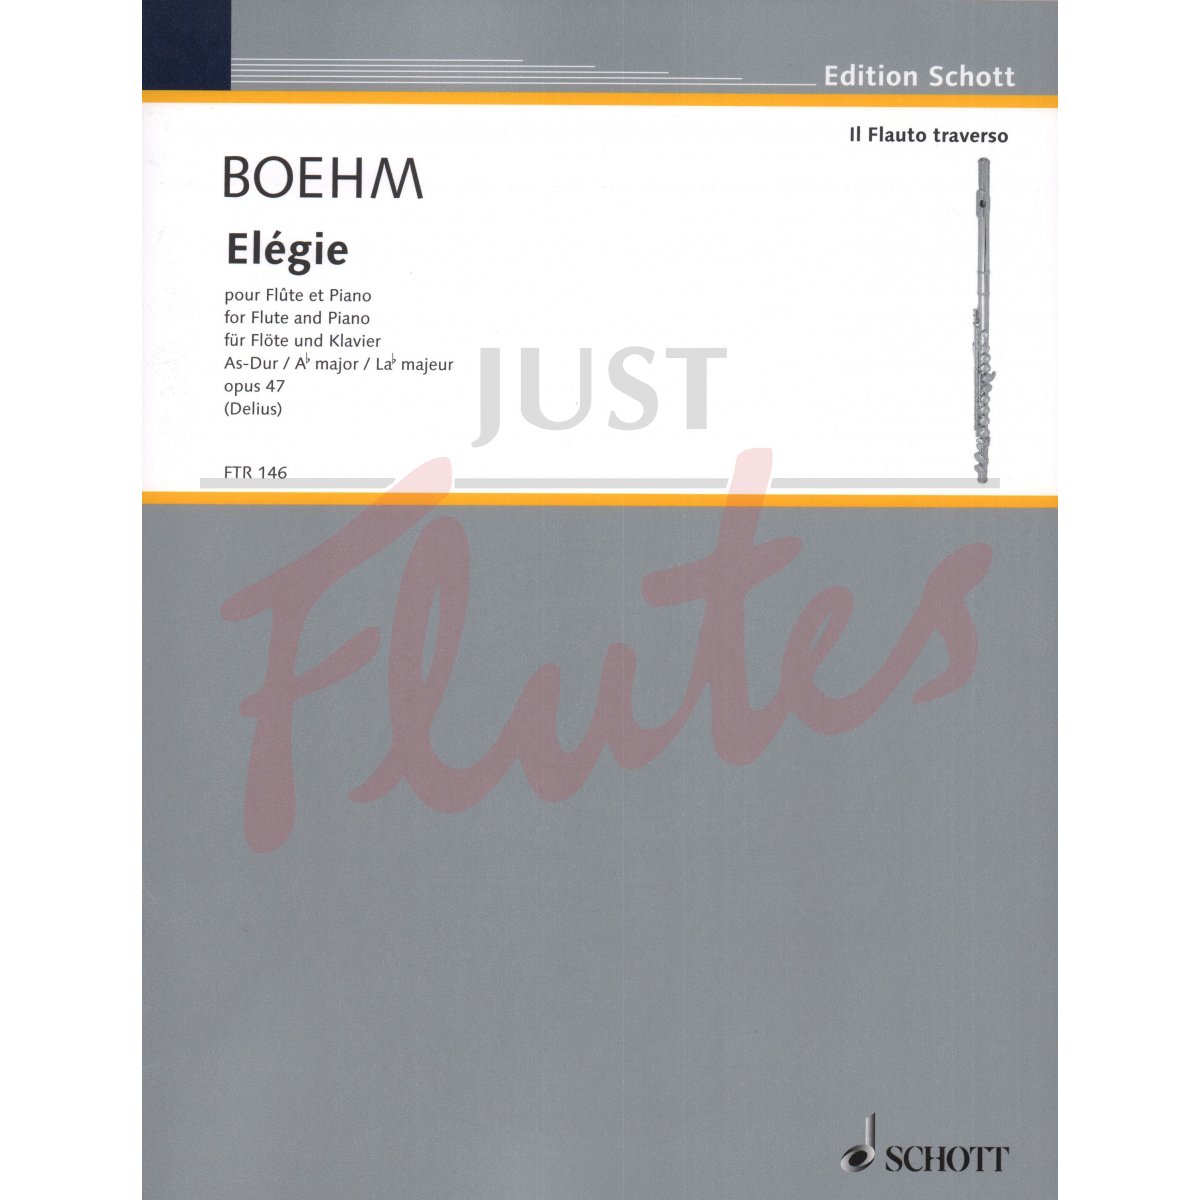 Elégie in Ab major for Flute and Piano